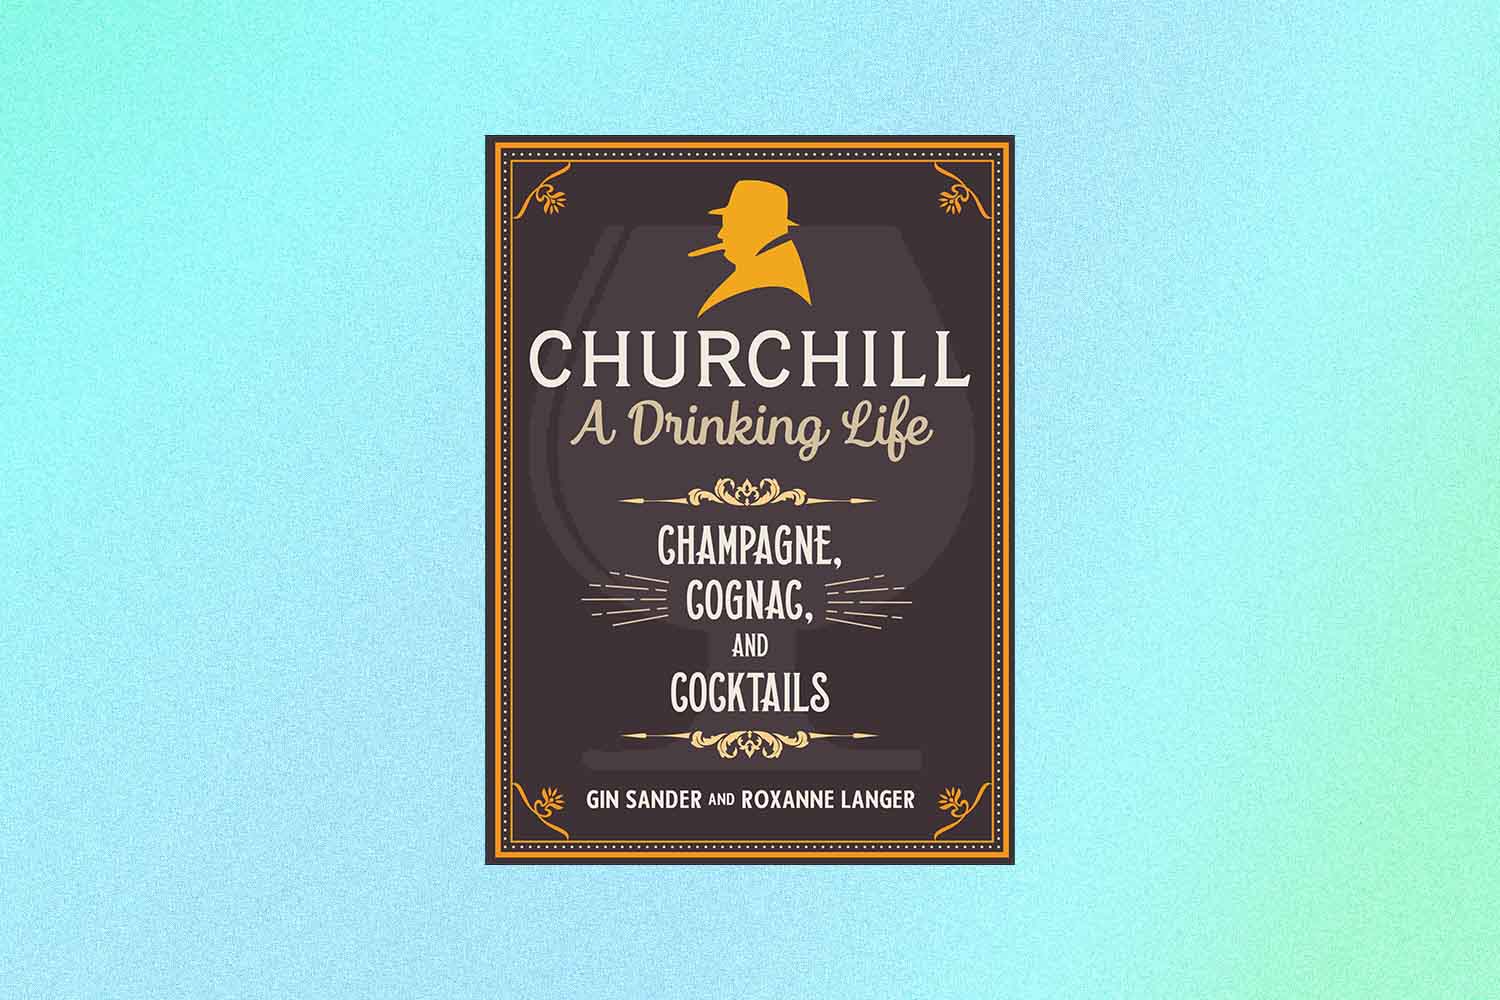 The front cover of "Churchill: A Drinking Life"